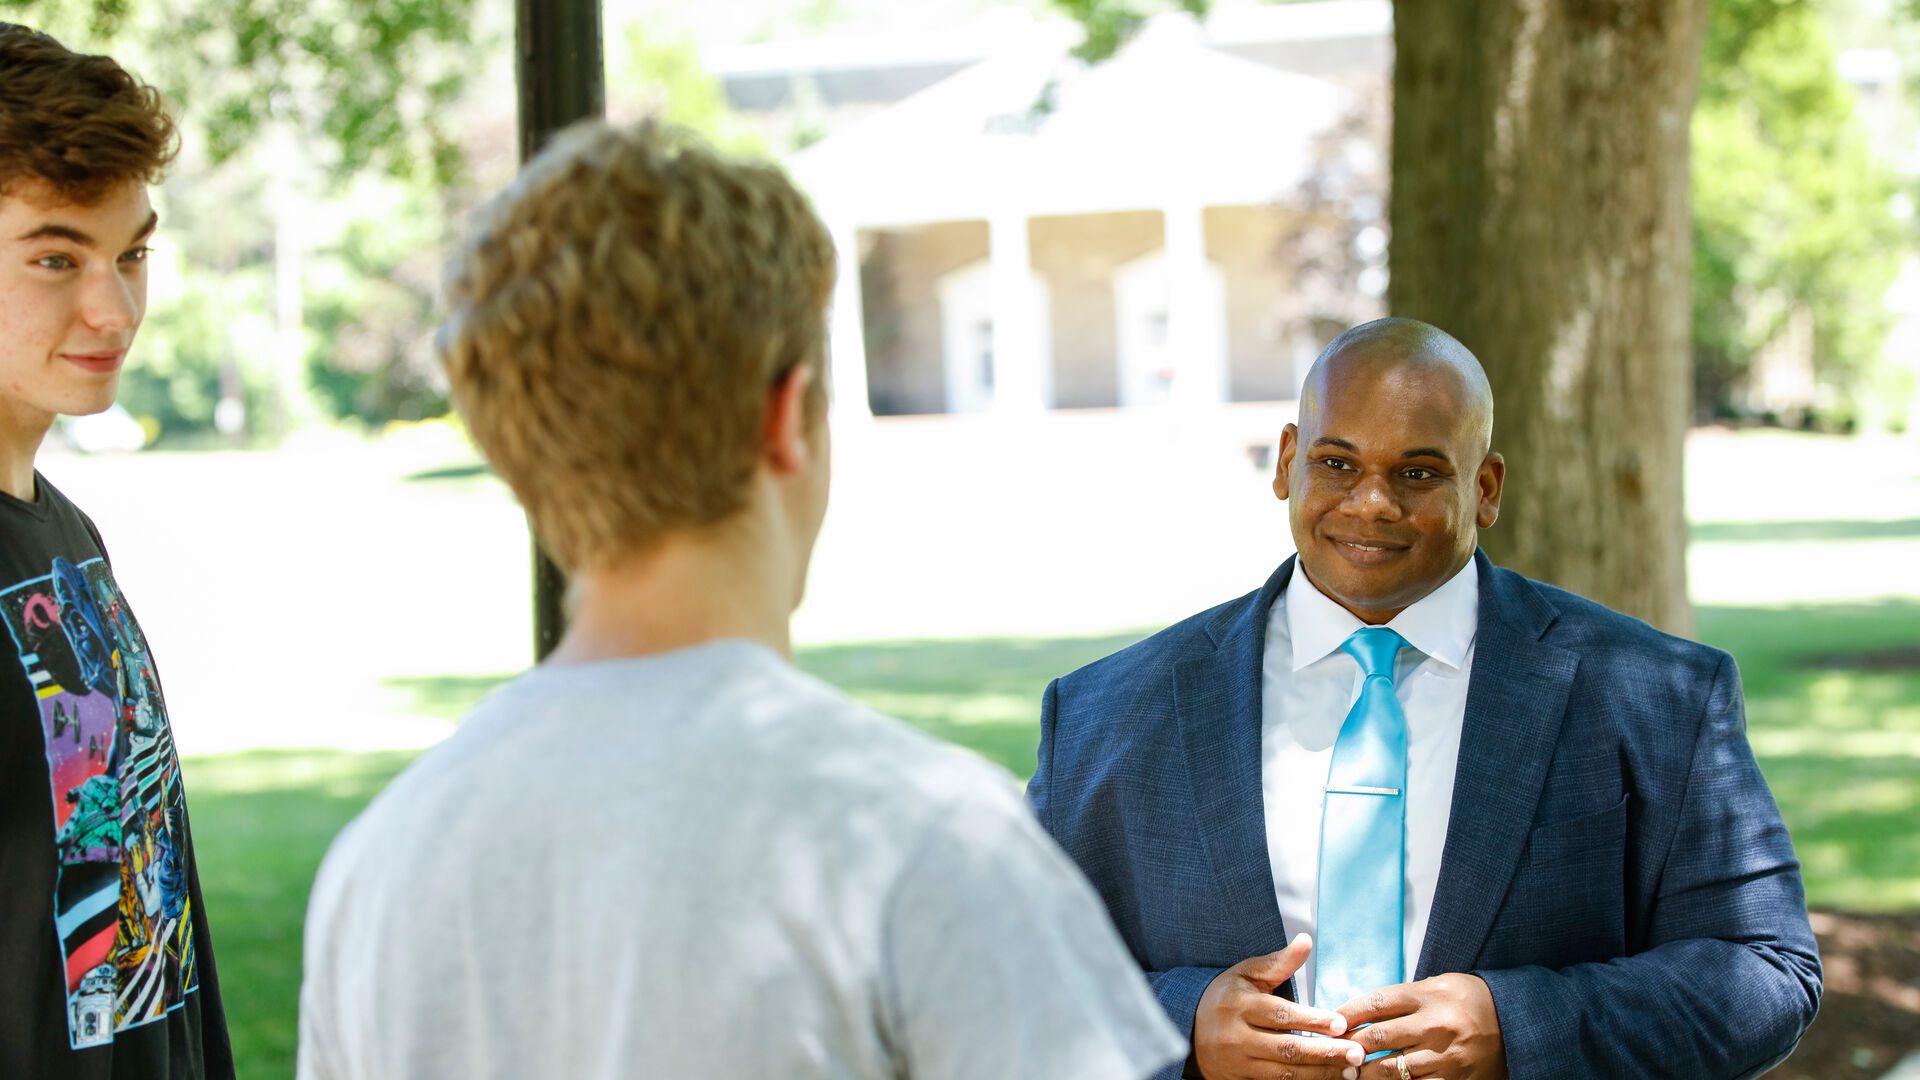 President Lewis speaking to students on Houghton's campus.